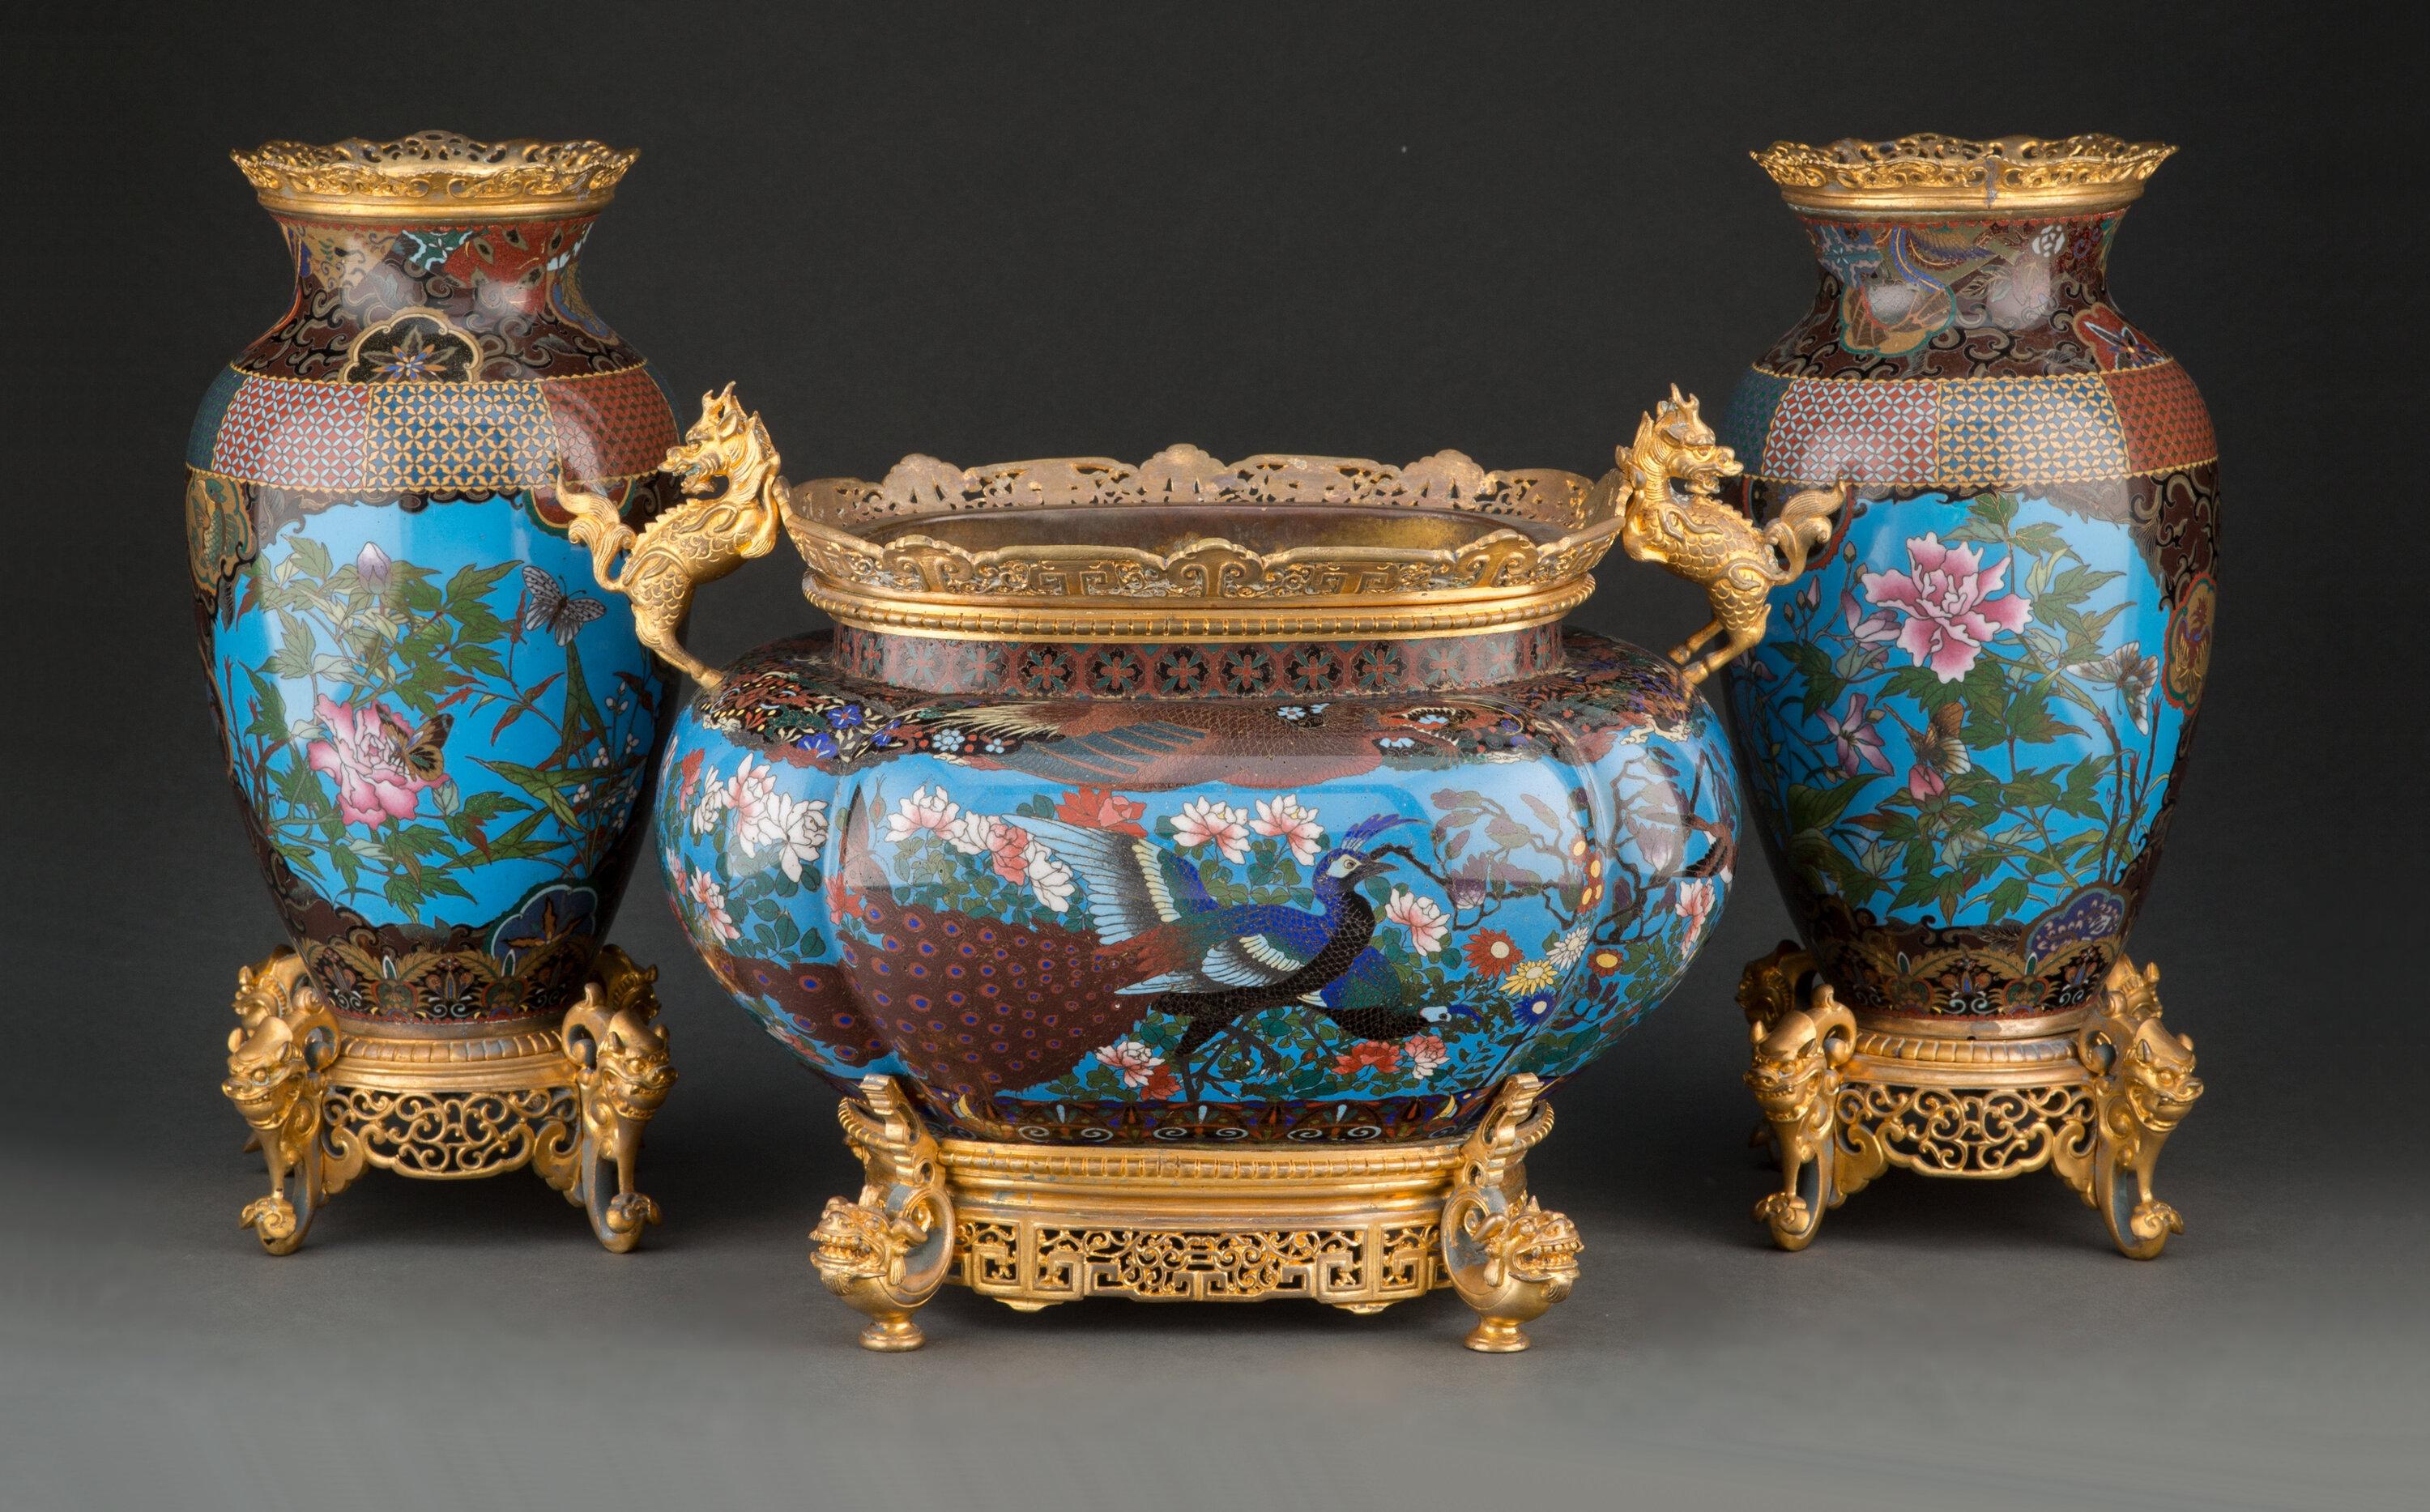 Finest quality three piece chinoiserie style 19th century French bronze mounted Cloisonne enamel Garniture set comprising a pair of vases and a centerpiece.  The bronze mounts are French 19th century and the Cloisonne enamels are Japanese Meiji